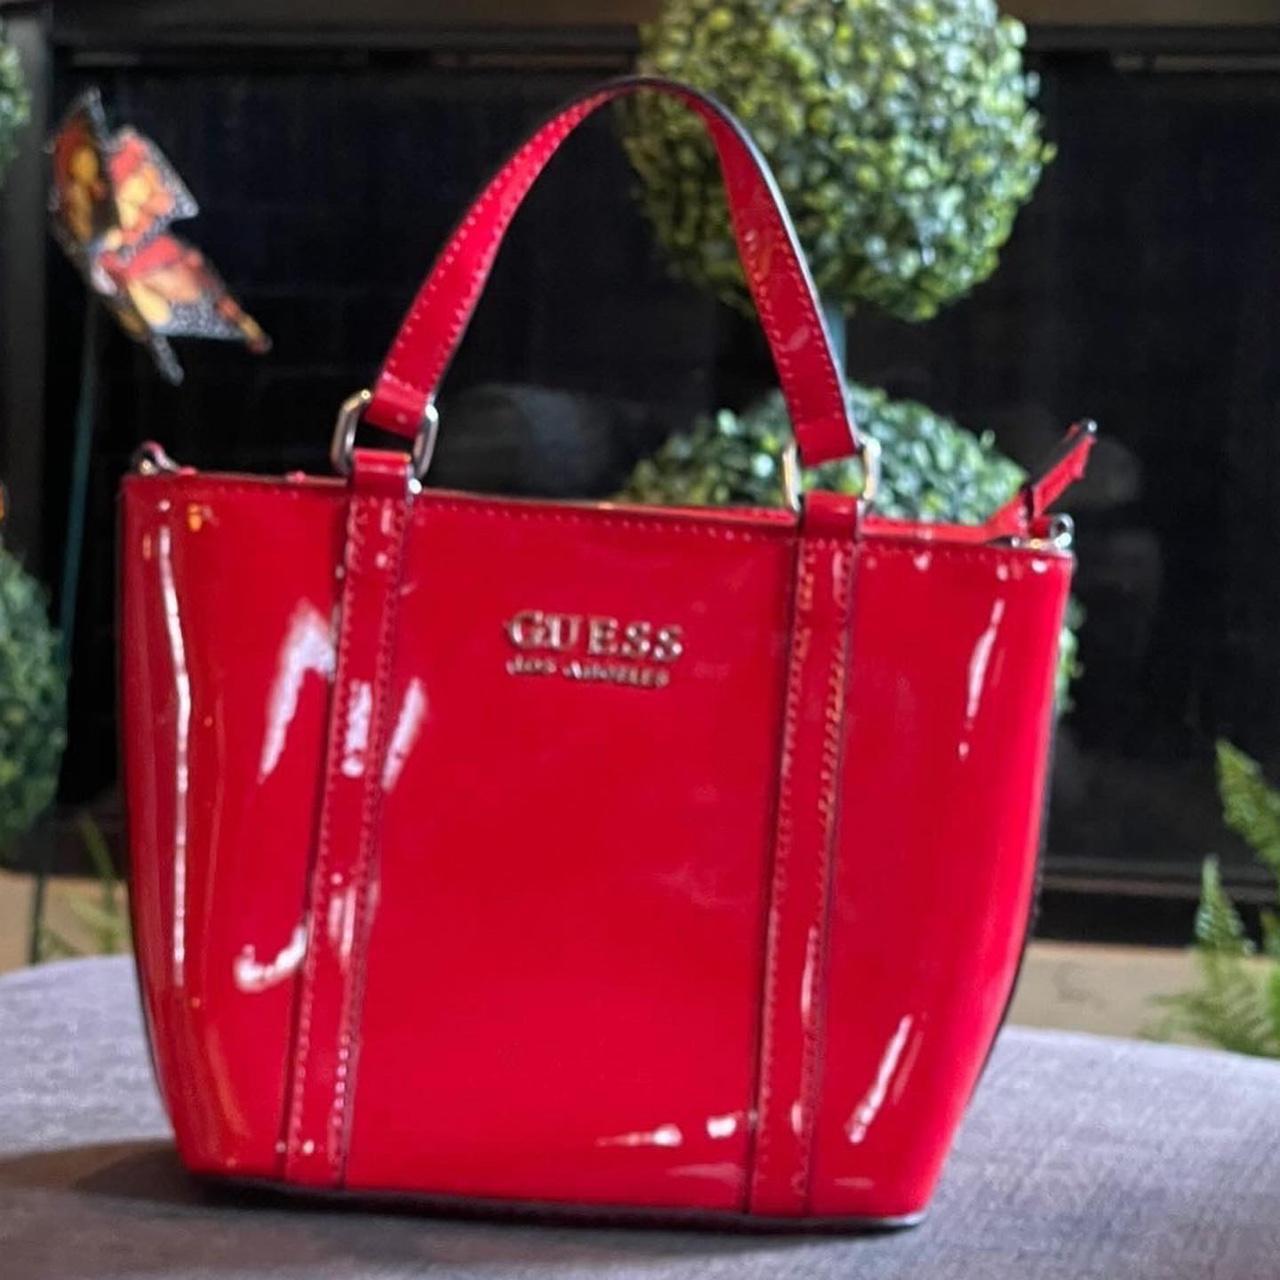 Guess | Bags | Red Guess Los Angeles Purse | Poshmark